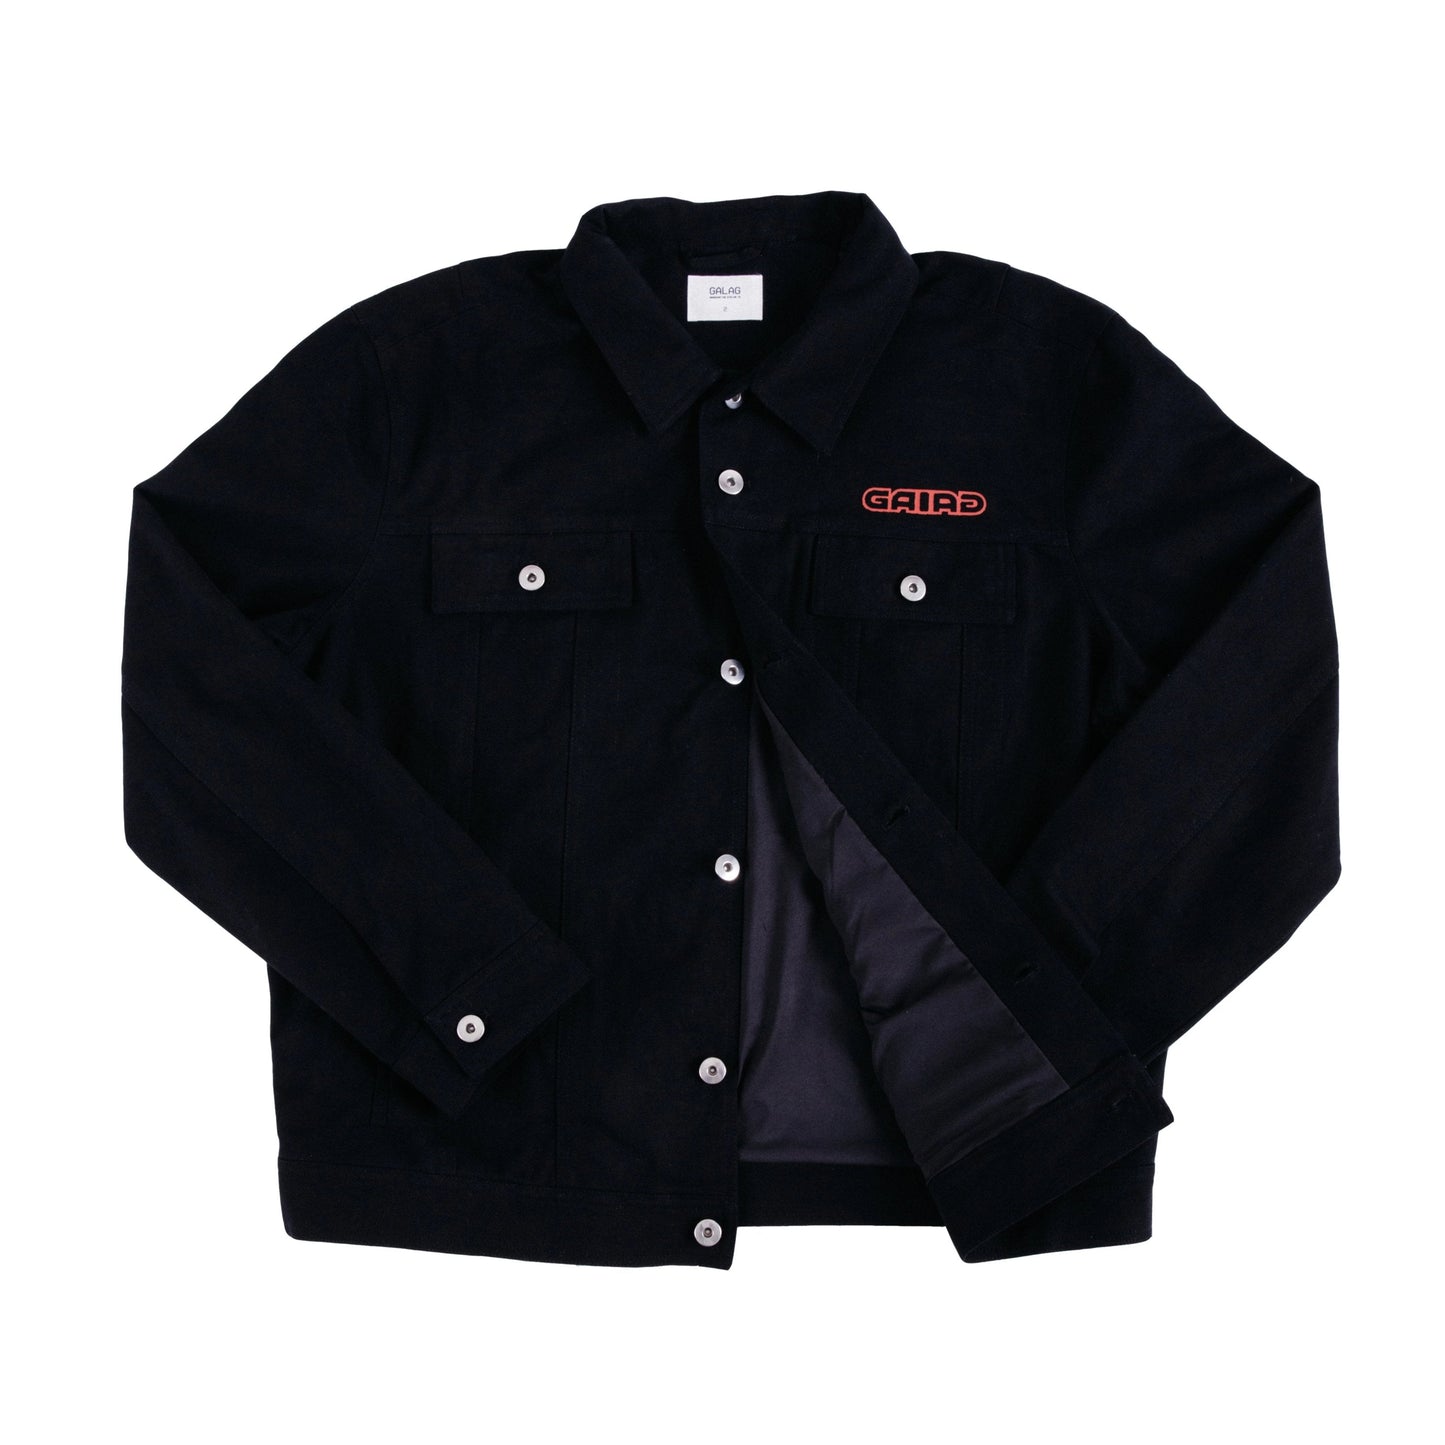 "THE DECADE YOU ARE LOOKING FOR..." BLACK CANVAS JACKET